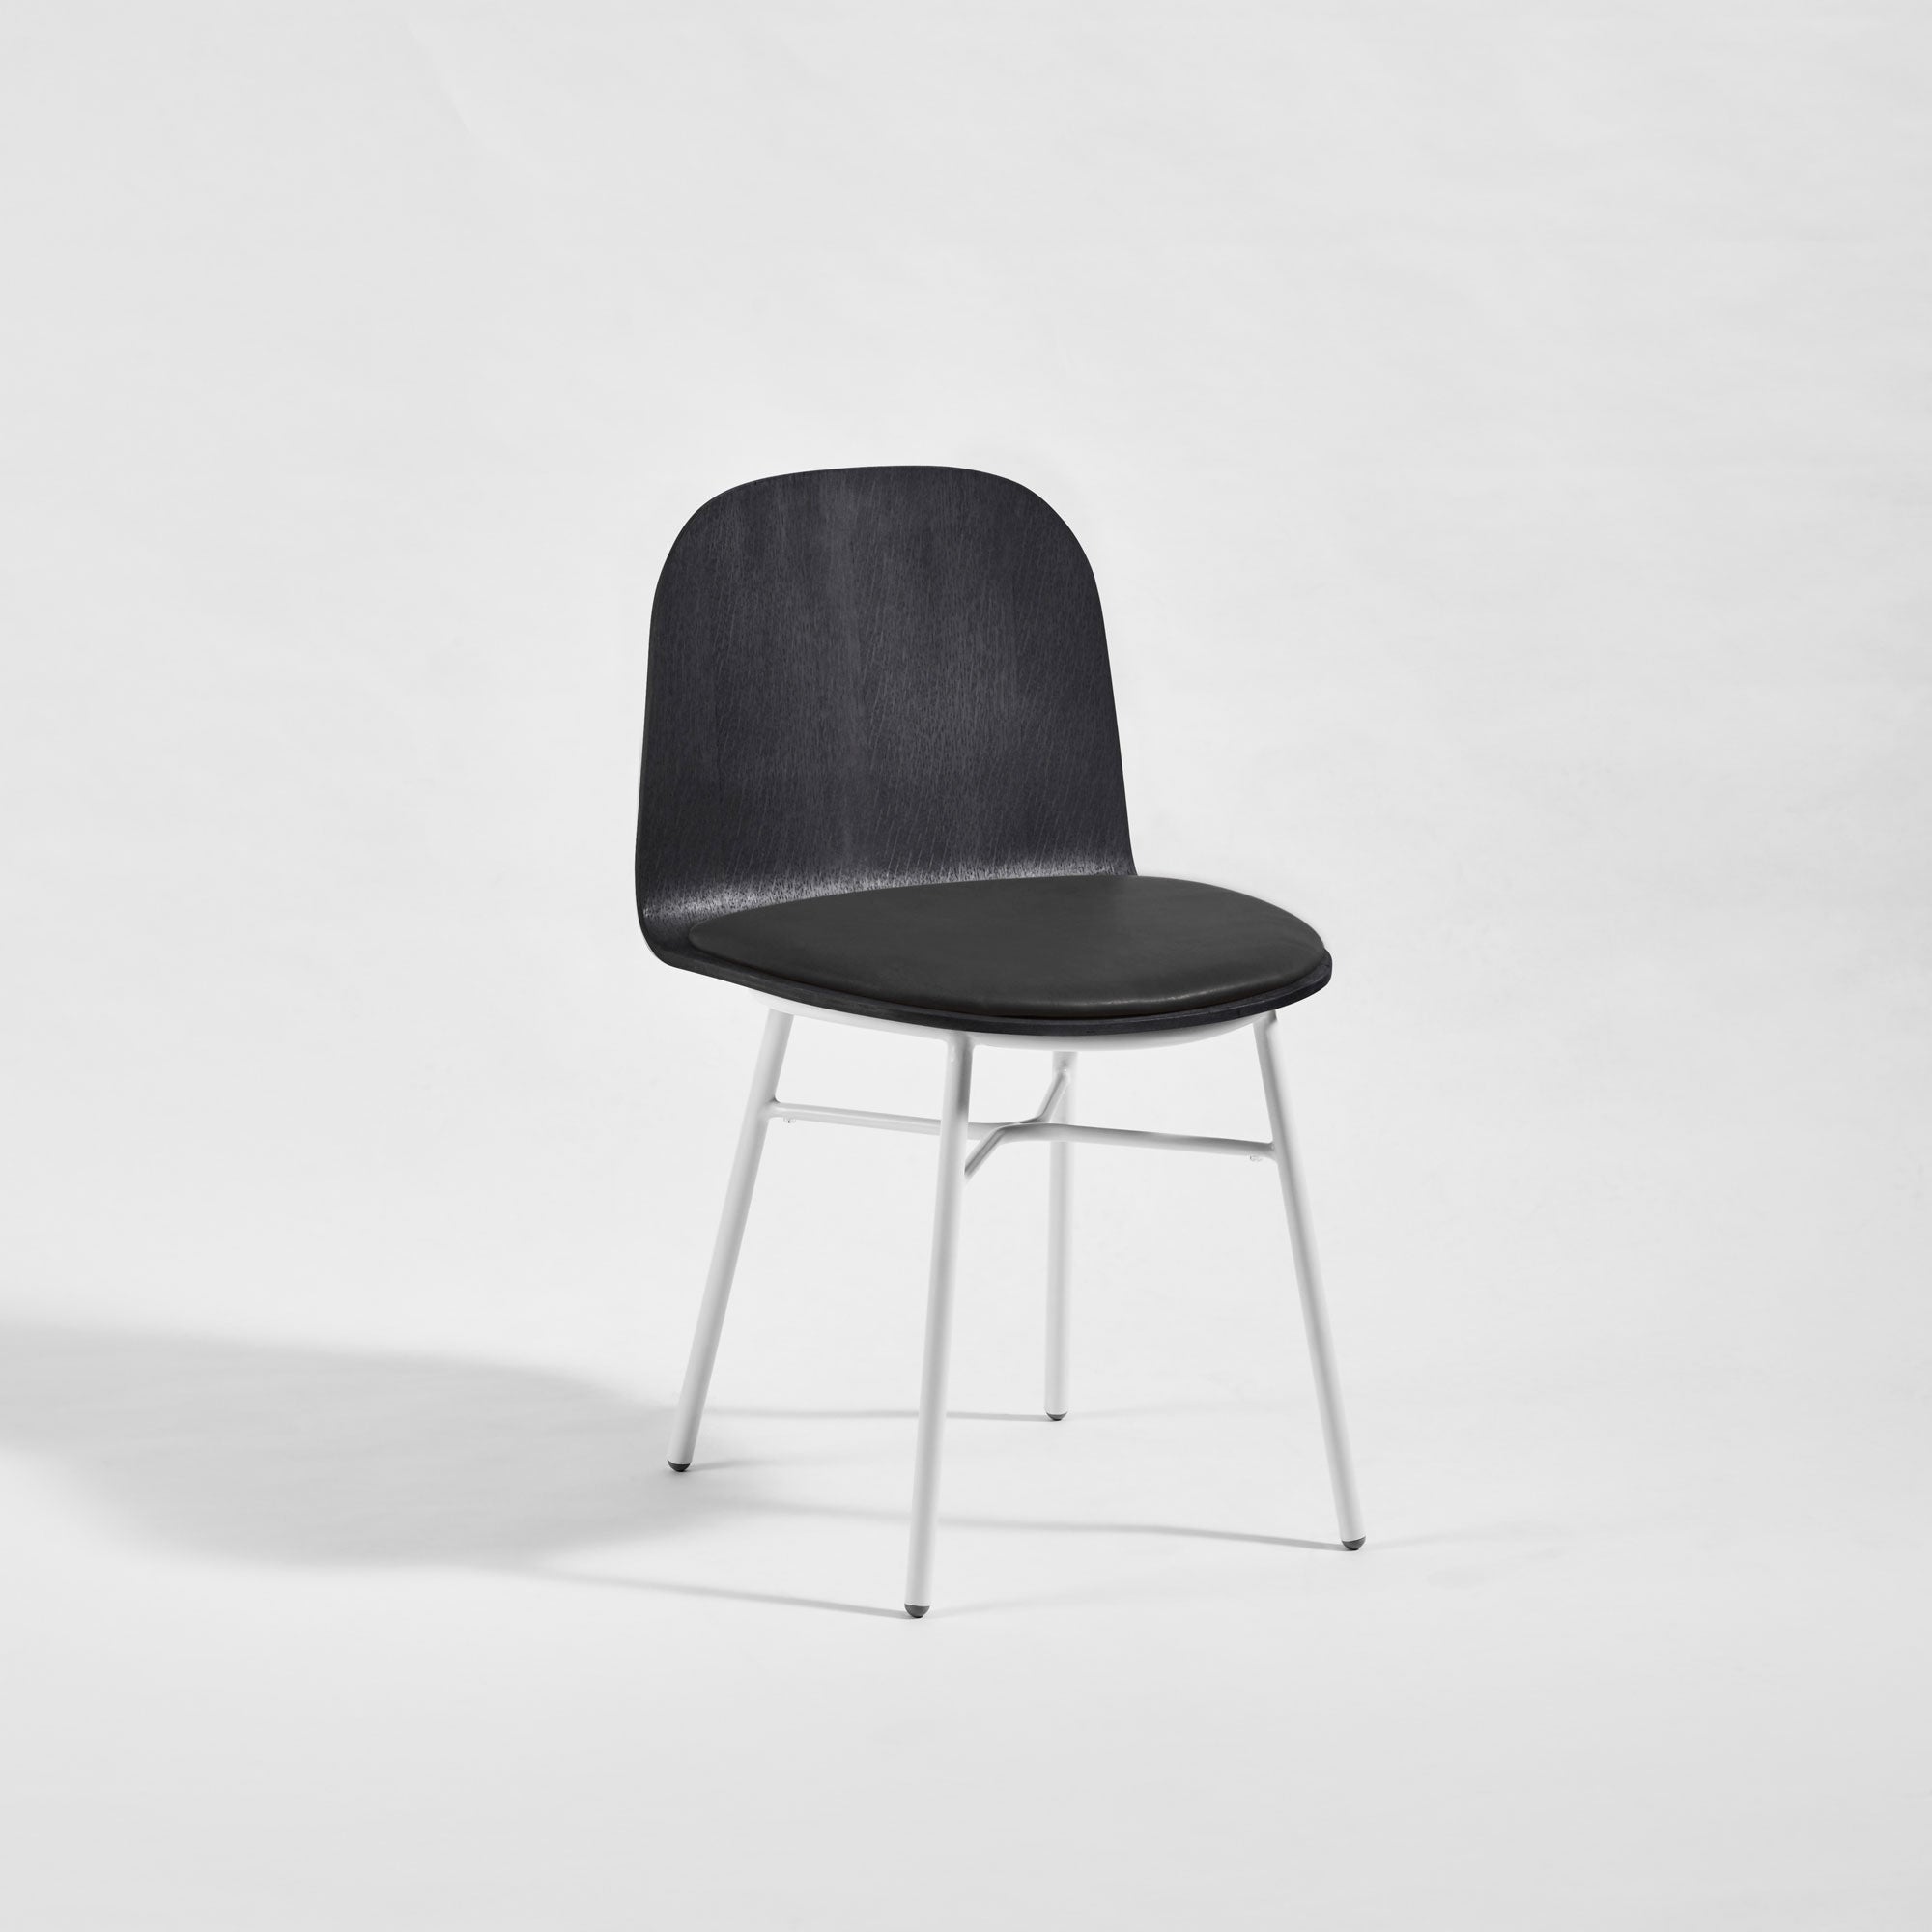 Potato Chair | Timber & Upholstered Dining Office Chair with Handle | GibsonKarlo | DesignByThem ** HL1 Leather Primary - BA90 Black / HF2 Lariat (Vinyl) - 006 Black 